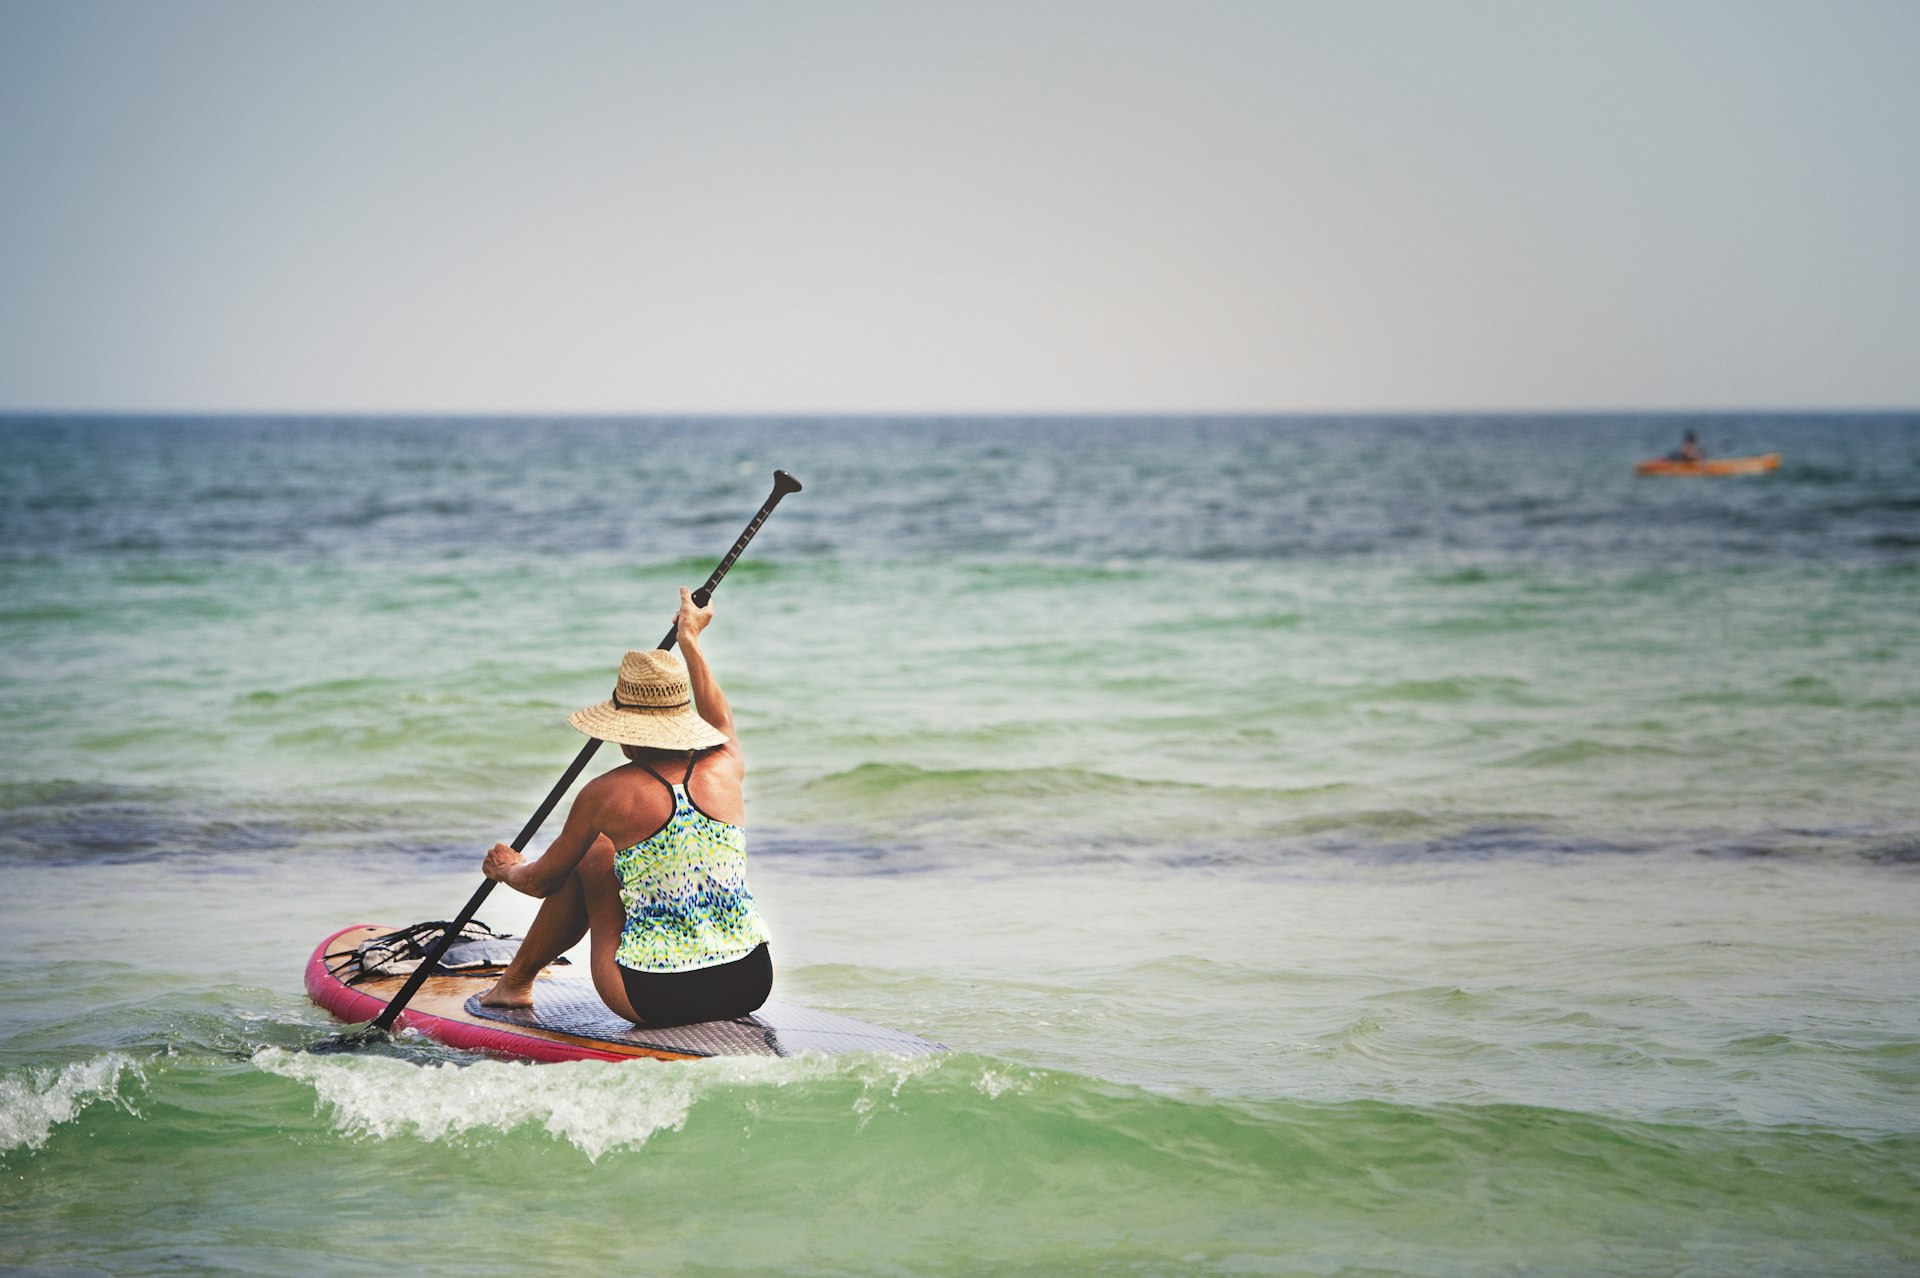 A senior woman paddles on a paddleboard in shallow water off the coastline of Pensacola, Florida